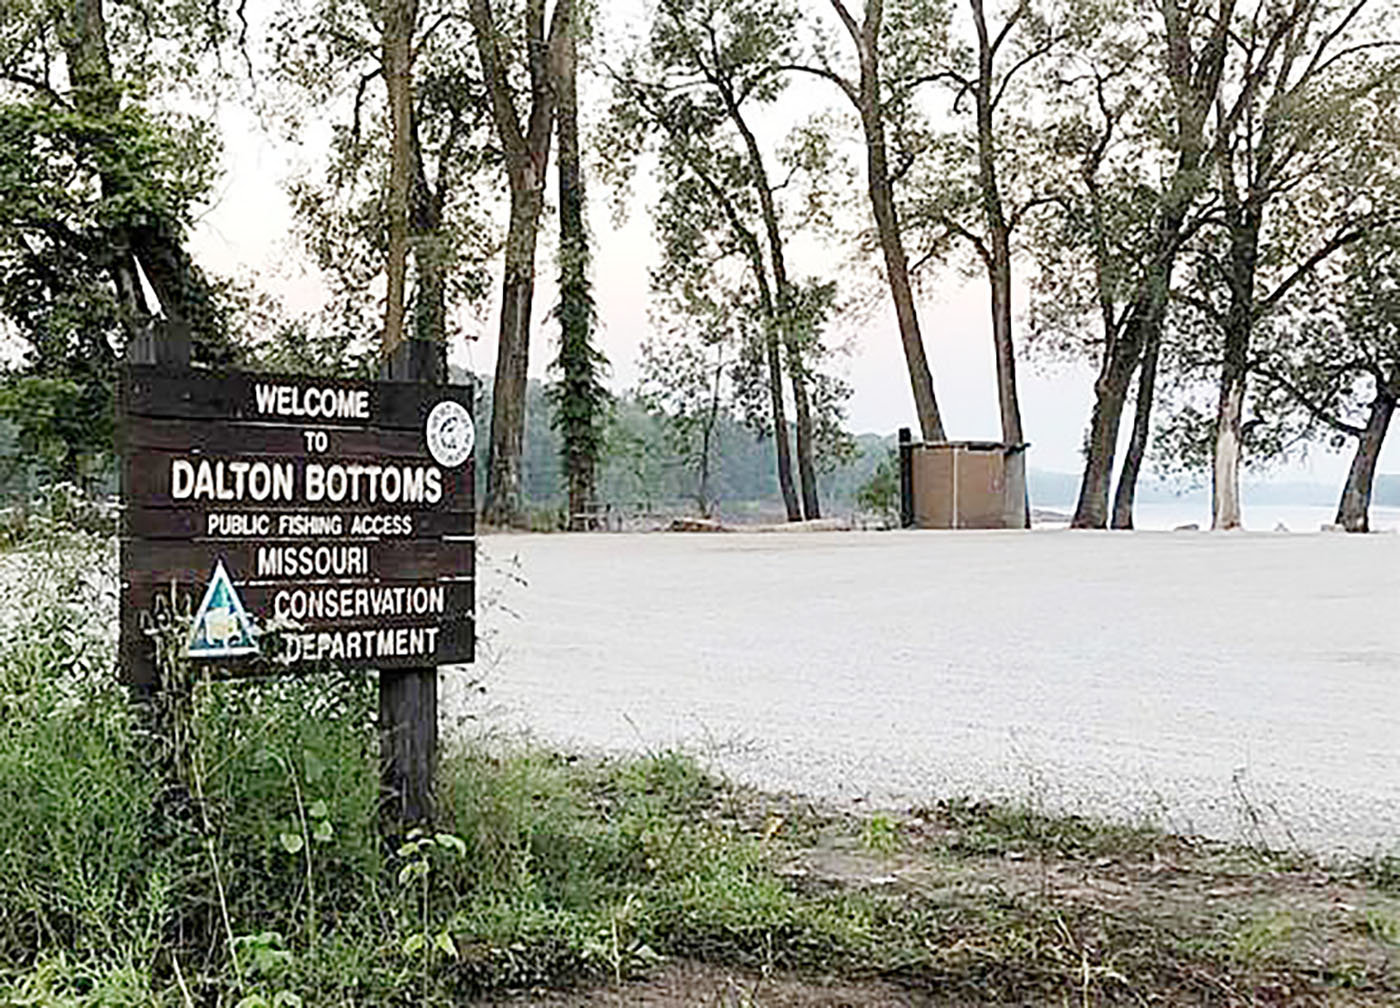 Dalton Bottoms, a fishing access point operated by the Missouri Department of Conservation, will be the site of a high-stakes fishing tournament on Aug. 27-28. The ramp is located about five miles south of Dalton in Chariton County.